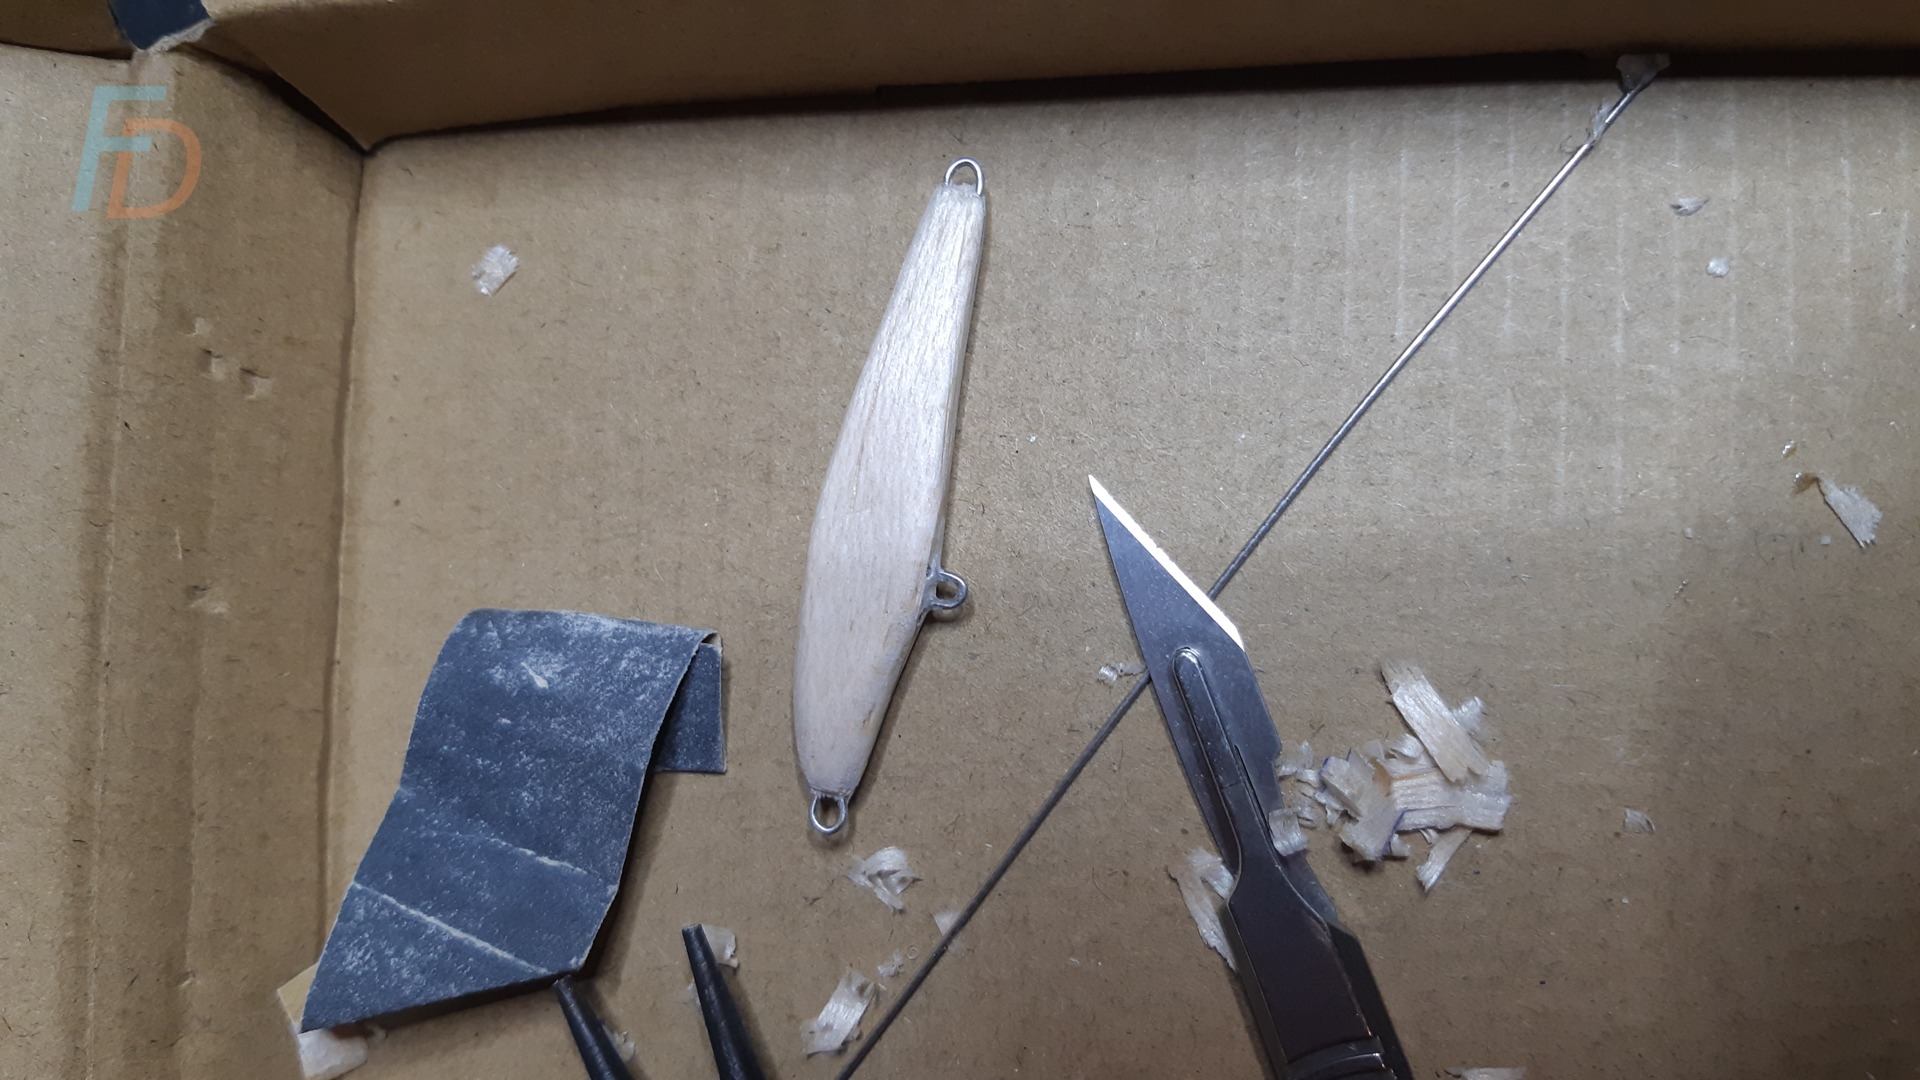 How to make fishing lures: Shaping a Balsa Minnow